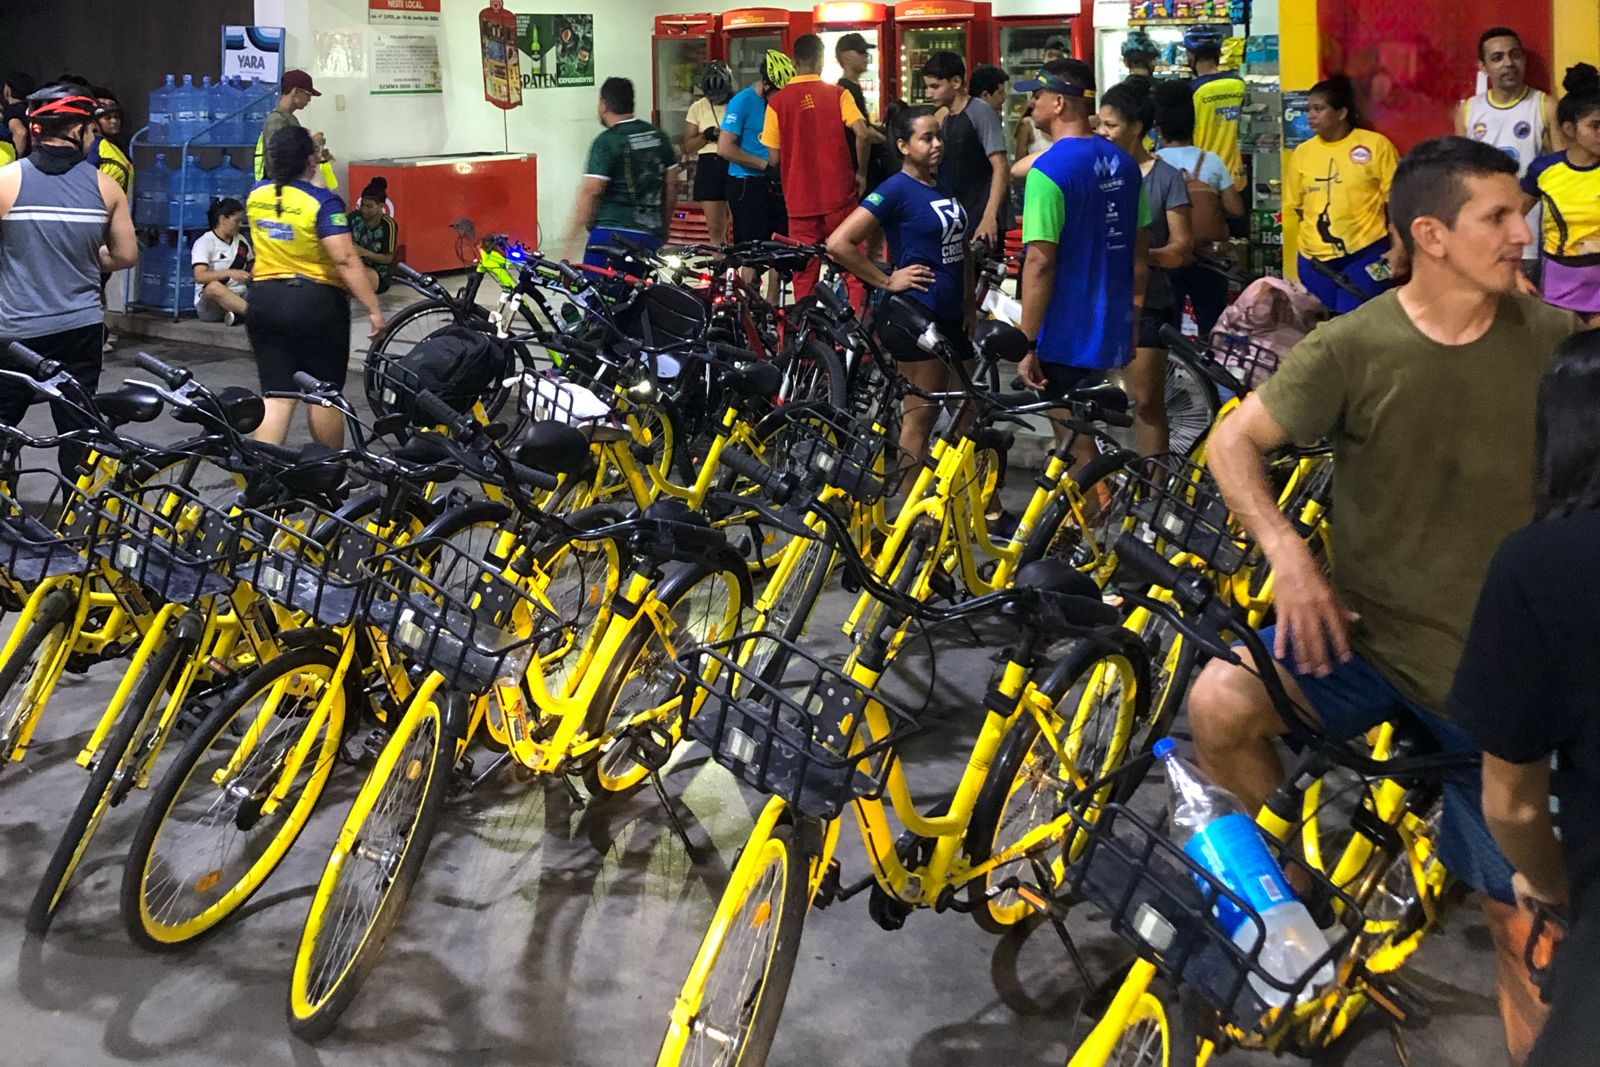 Project provides 108 bicycles for free night rides in Manaus, this Tuesday (20)